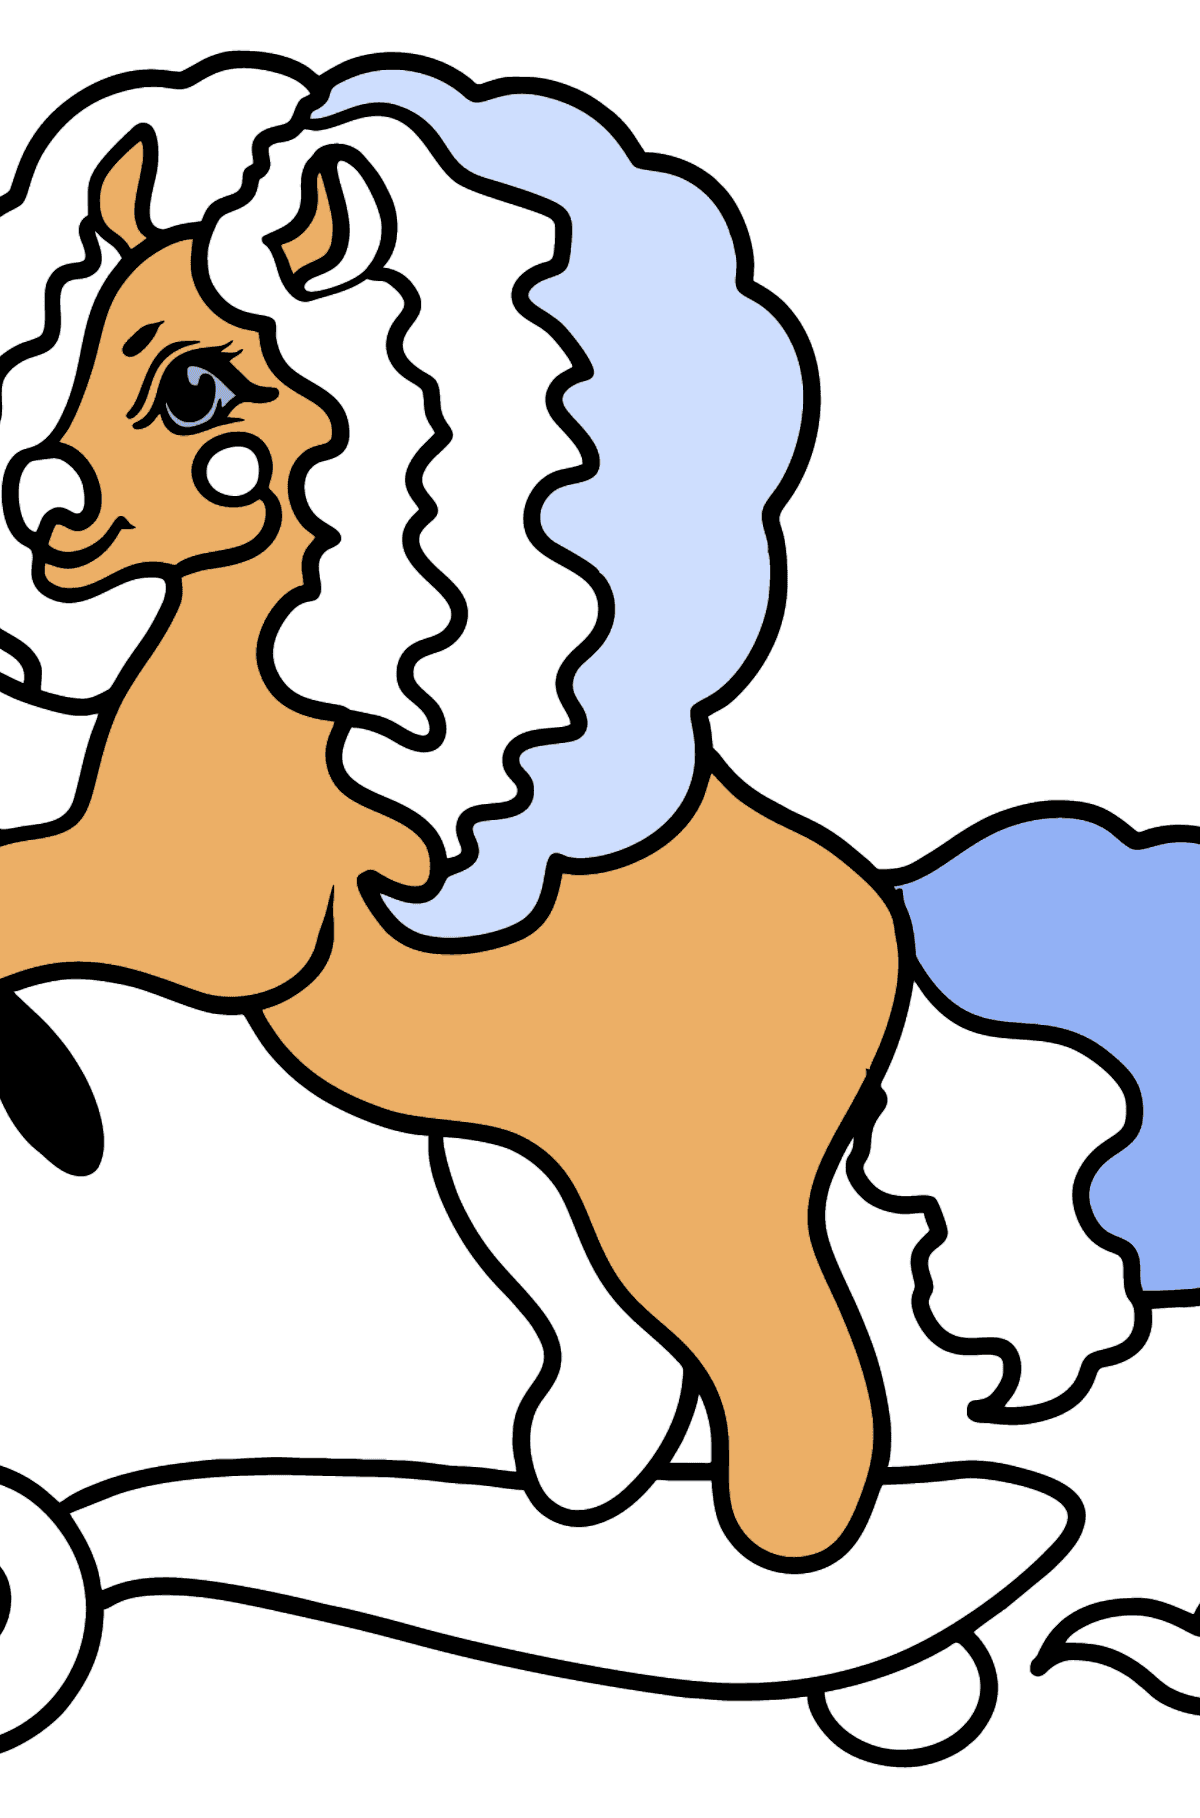 Pony on Scooter coloring page - Coloring Pages for Kids